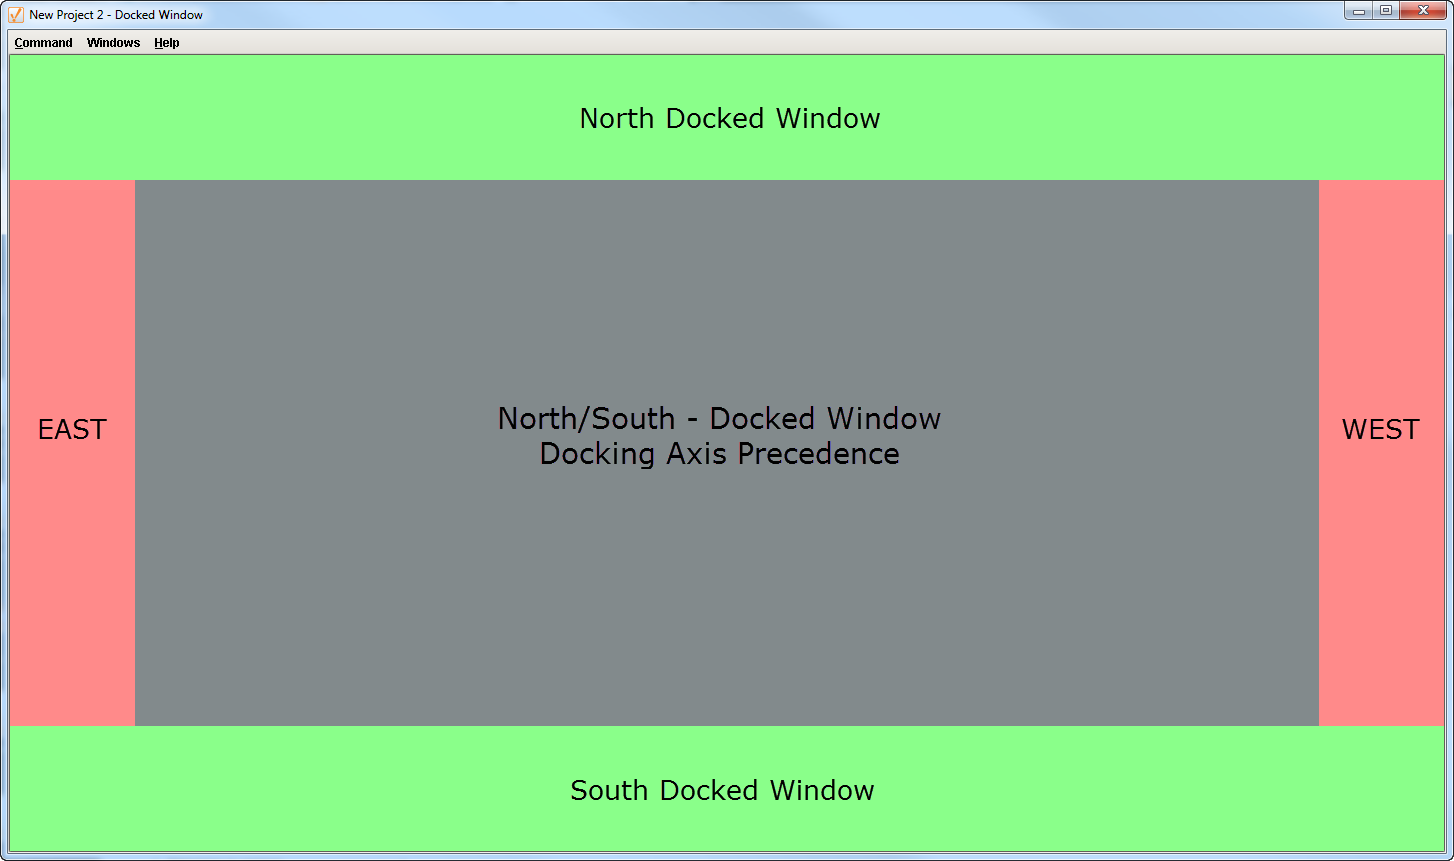 North/South Docking Axis Precedence